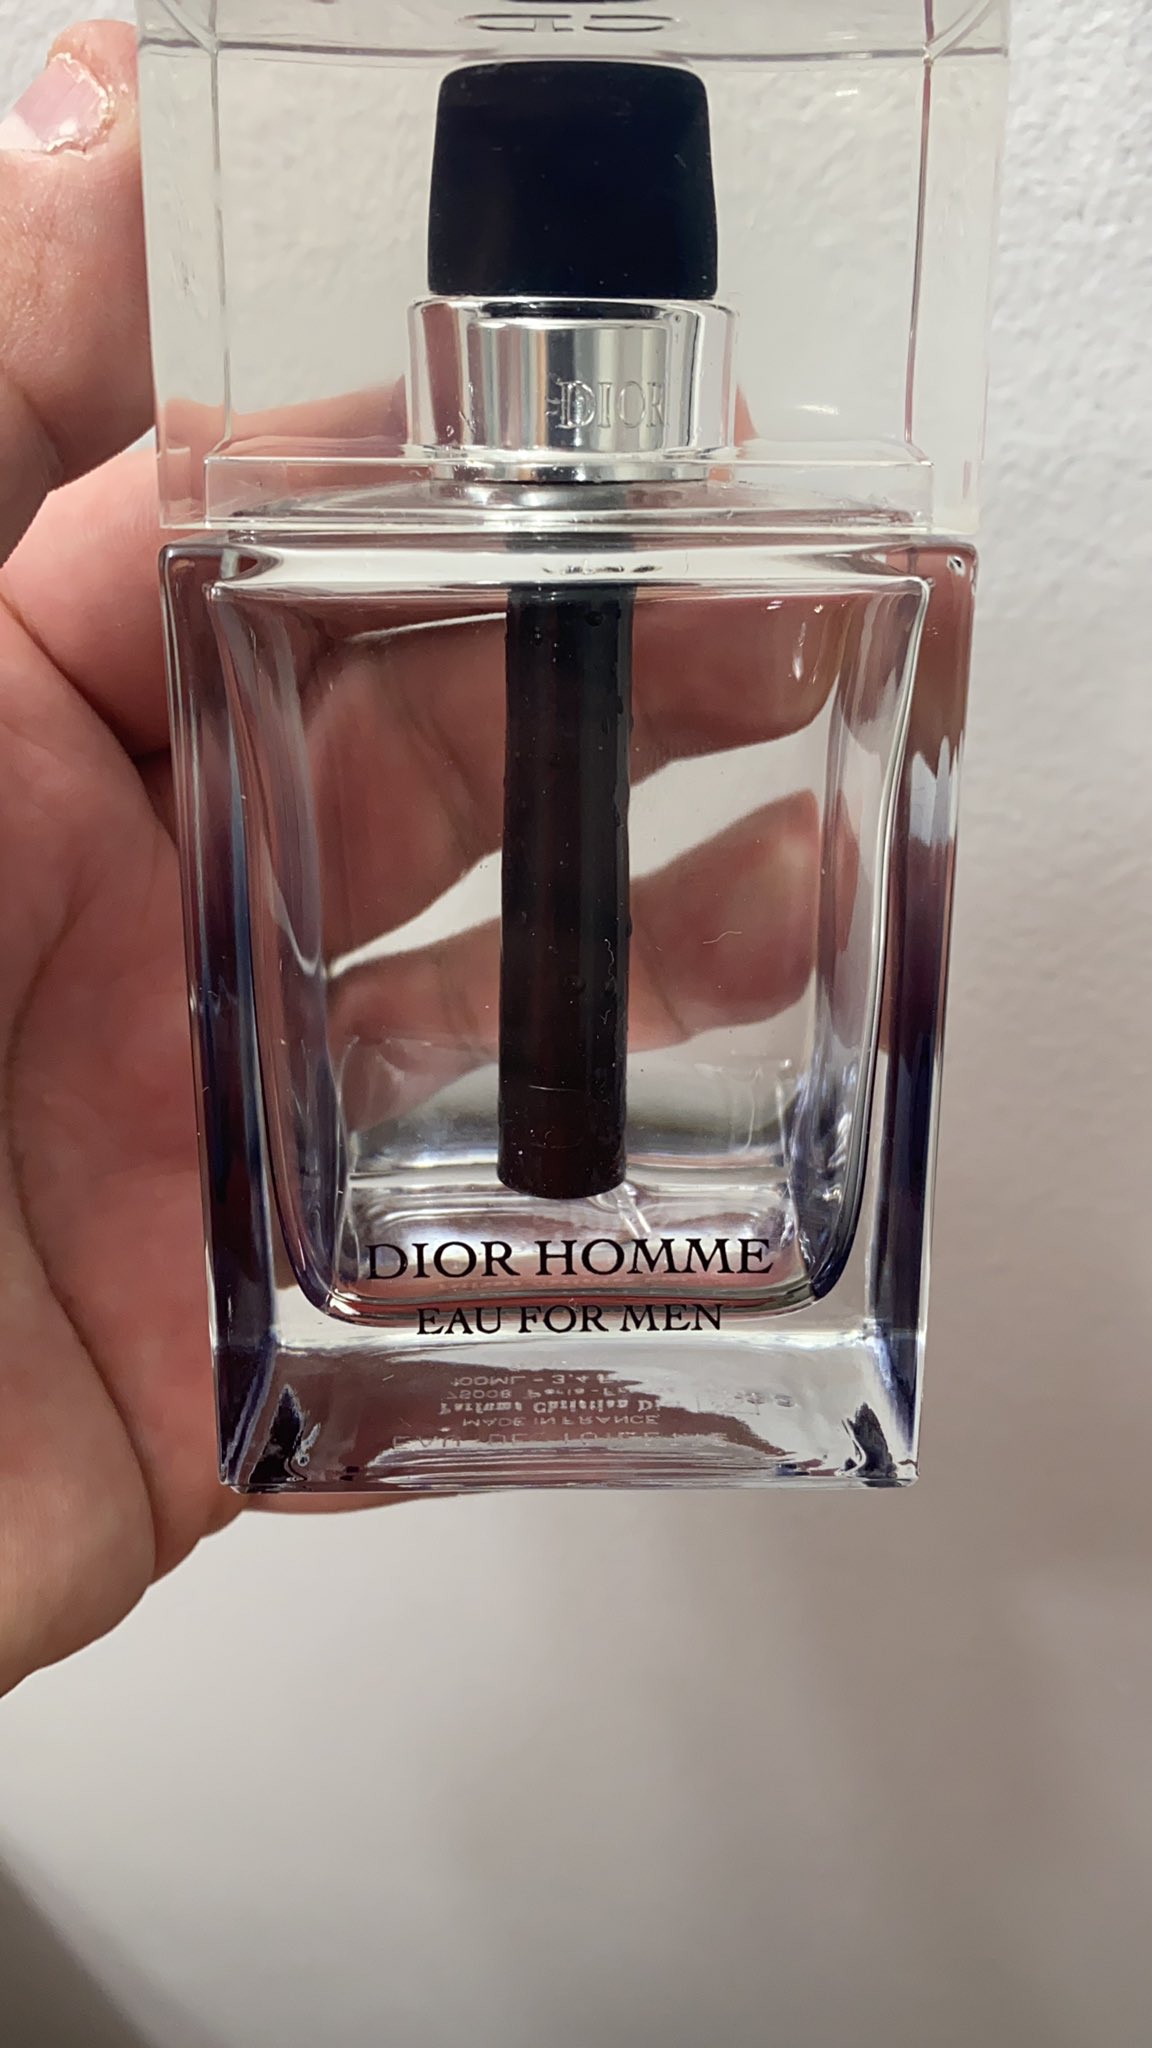 Wafel comfortabel roze Josh Gleave on Twitter: "Hey internet I'm looking for Dior Homme EAU FOR MEN.  Not sport. Not Cologne. Gotta be that Eau. Anyone have any good leads it  seems sold out or